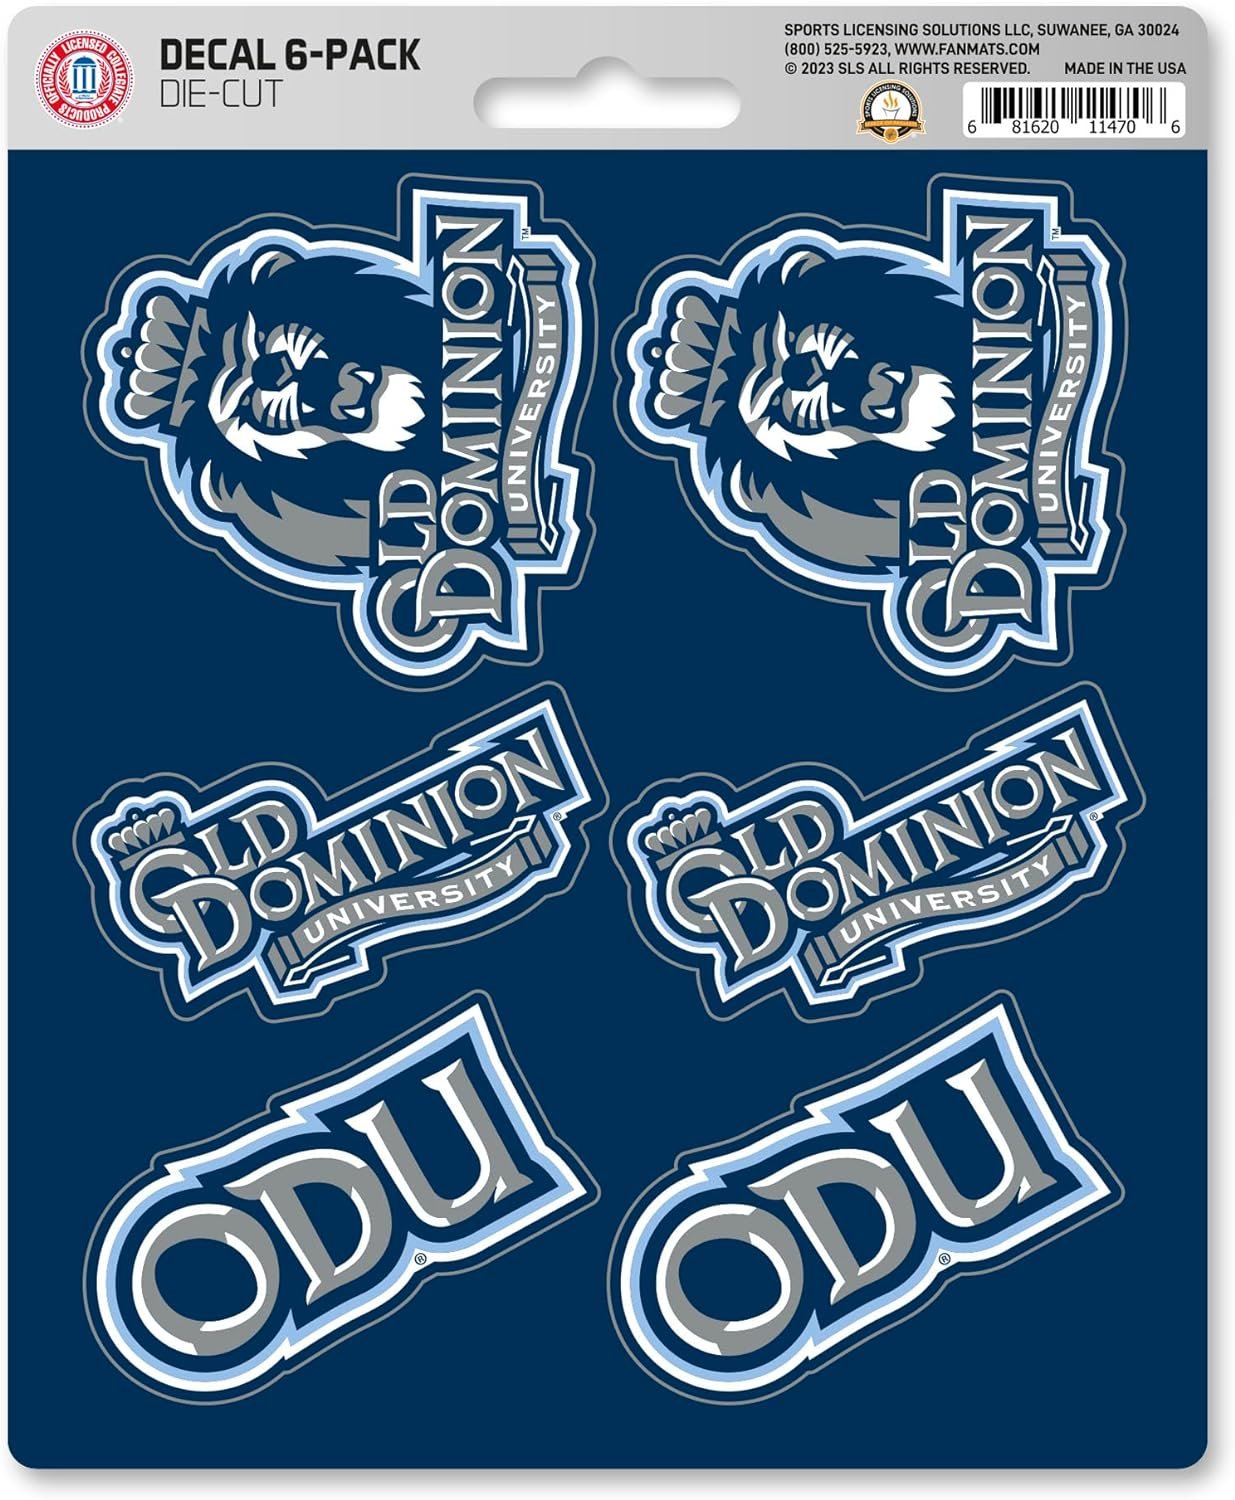 Old Dominion University Monarchs 6-Piece Decal Sticker Set, 5x6 Inch Sheet, Gift for football fans for any hard surfaces around home, automotive, personal items